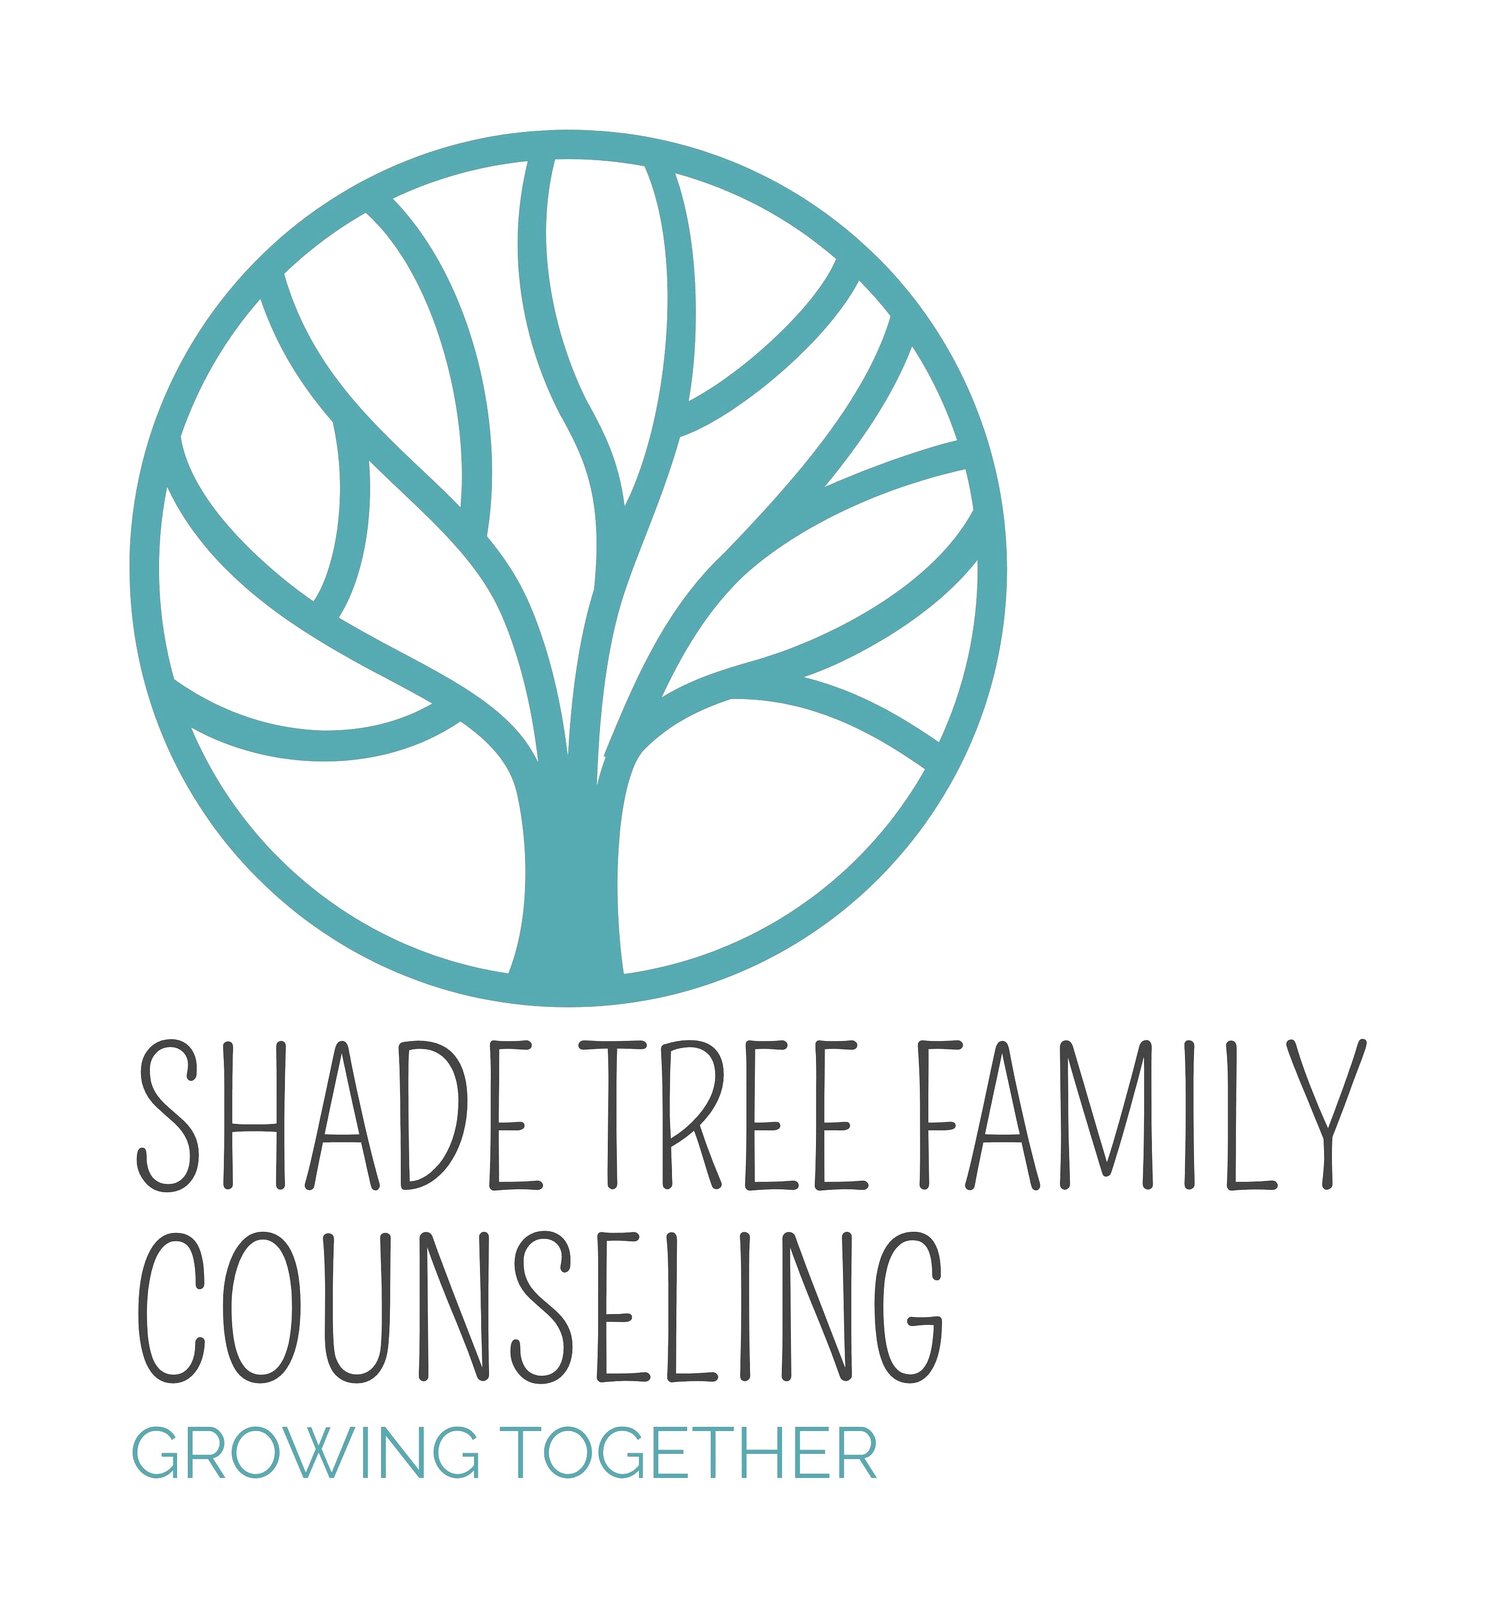 Shade Tree Family Counseling